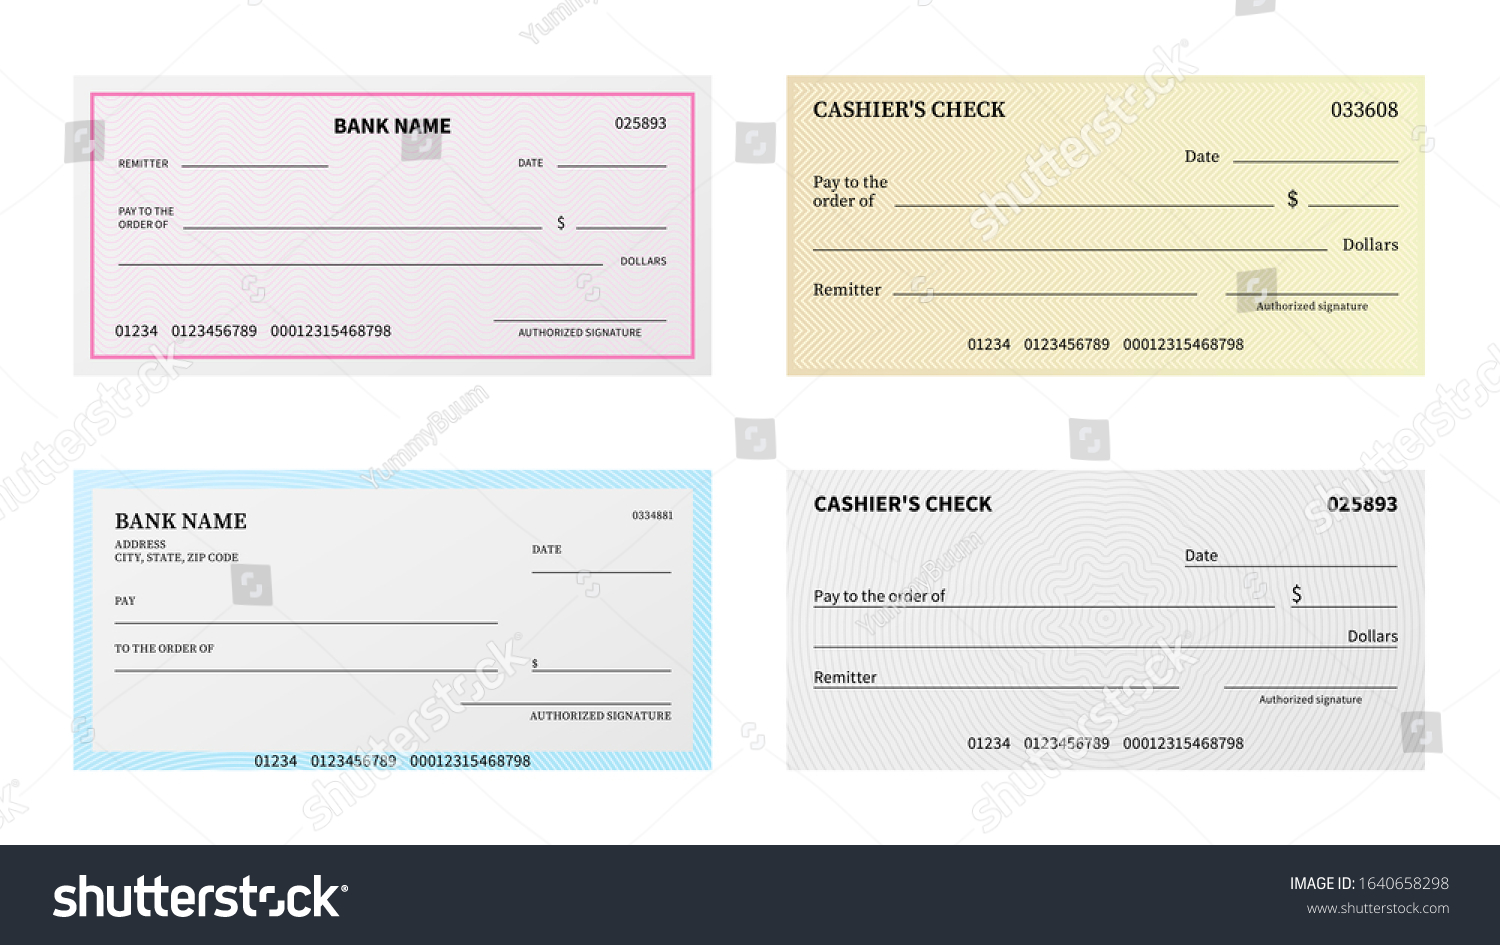 192 Large cheque Images, Stock Photos & Vectors | Shutterstock